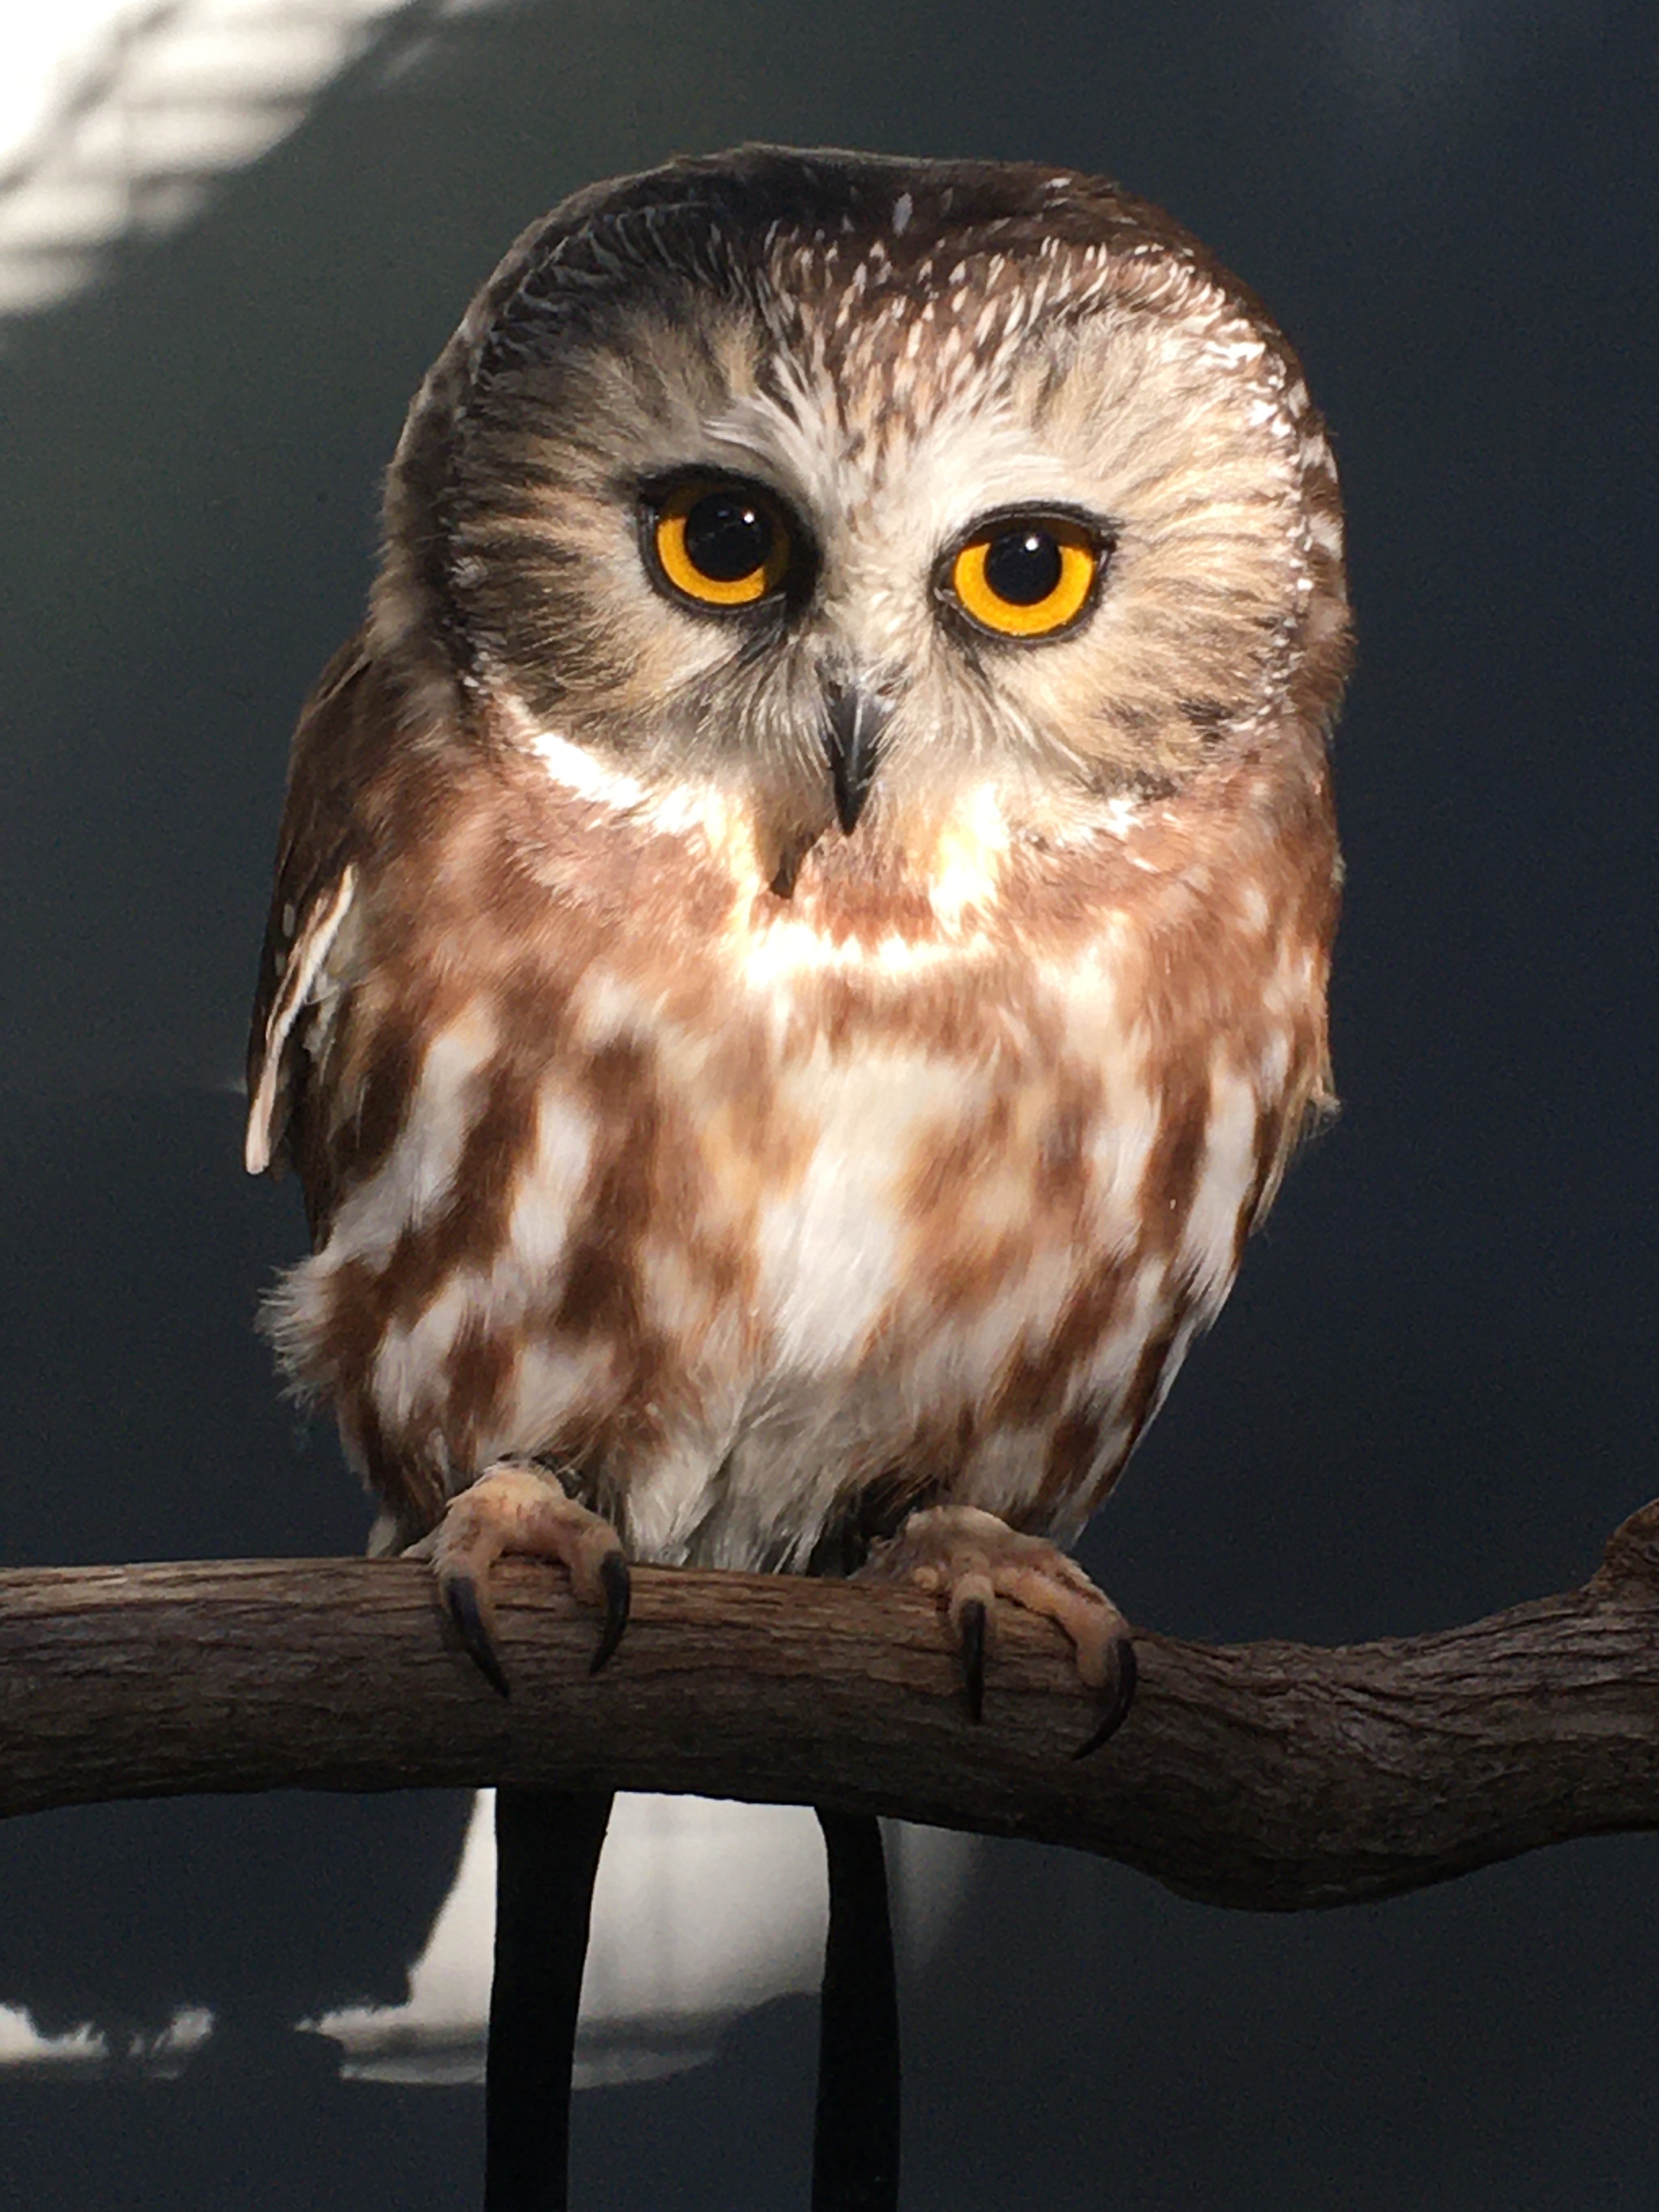 Spruce, a northern saw-whet owl